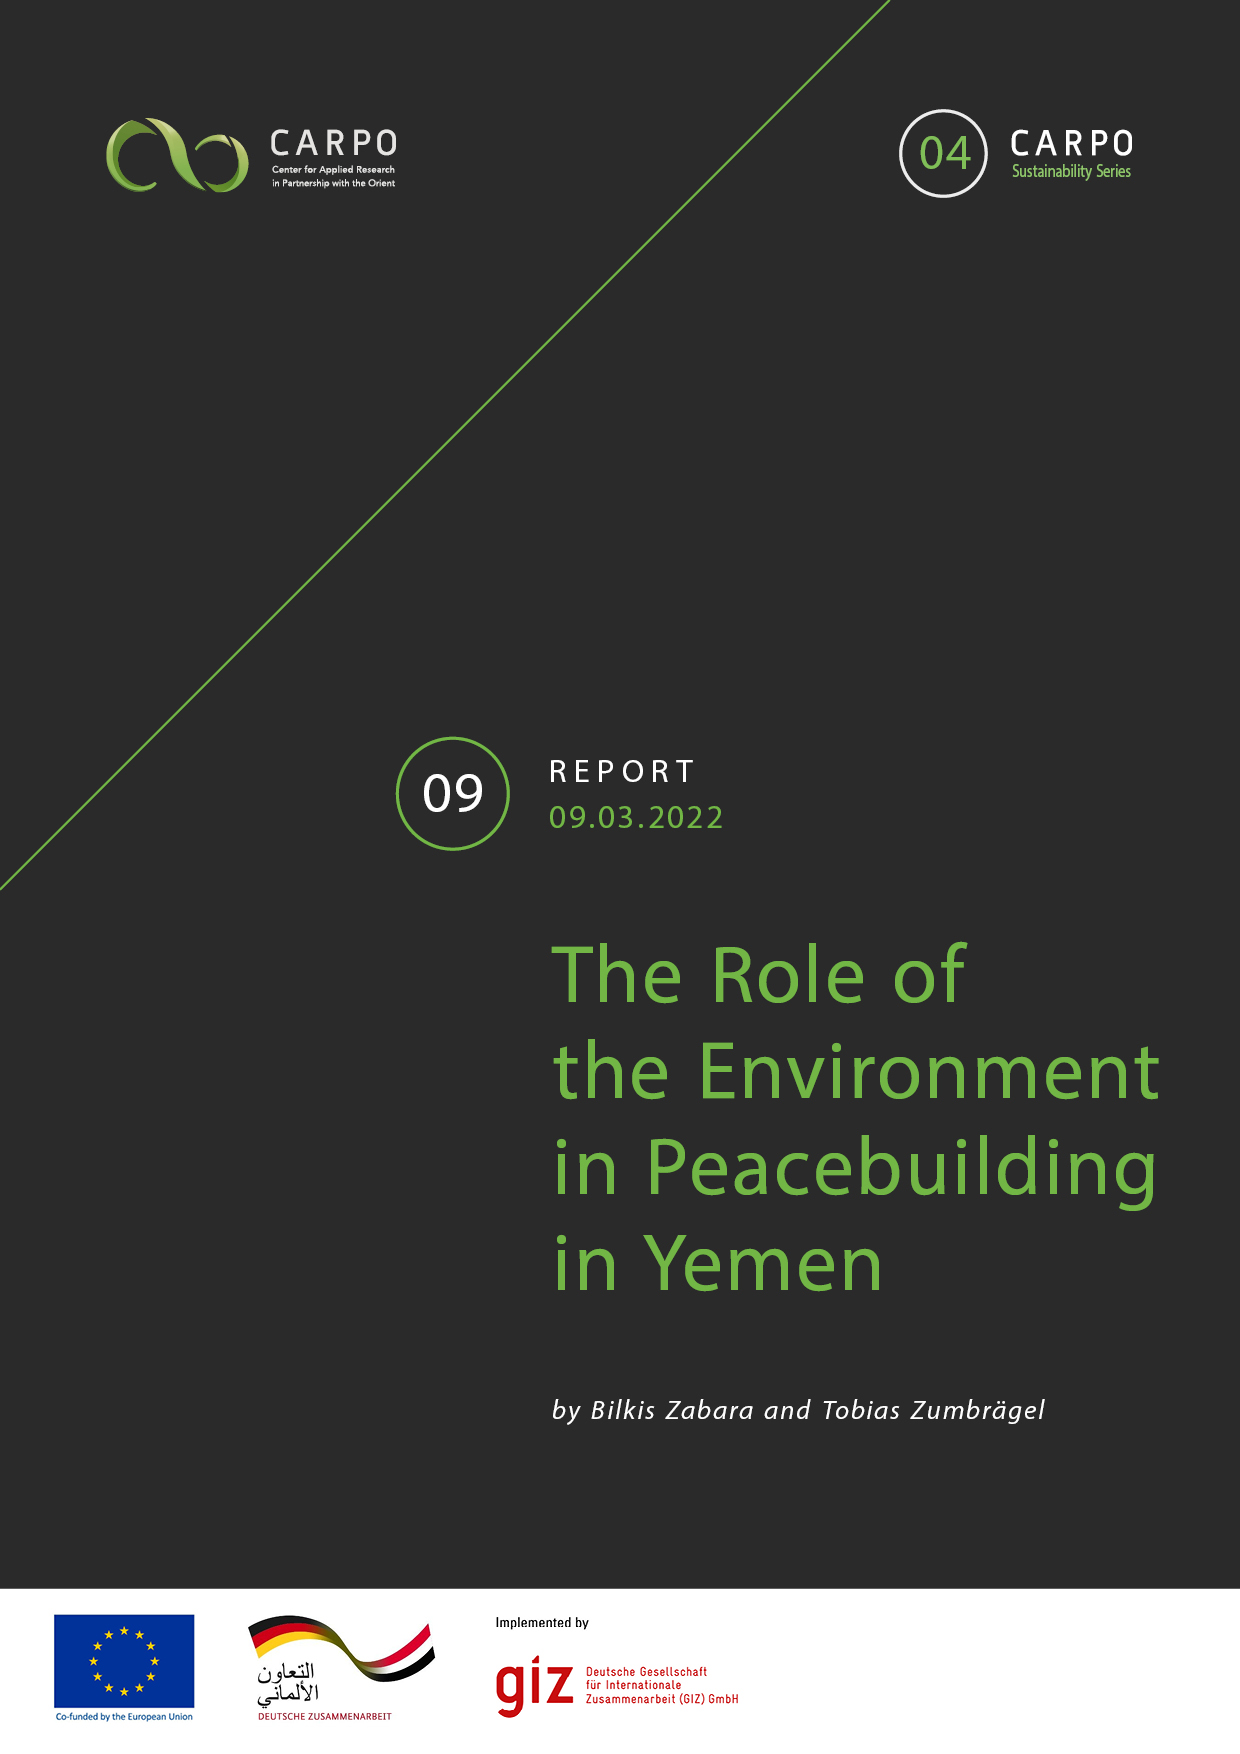 The Role of the Environment in Peacebuilding in Yemen 